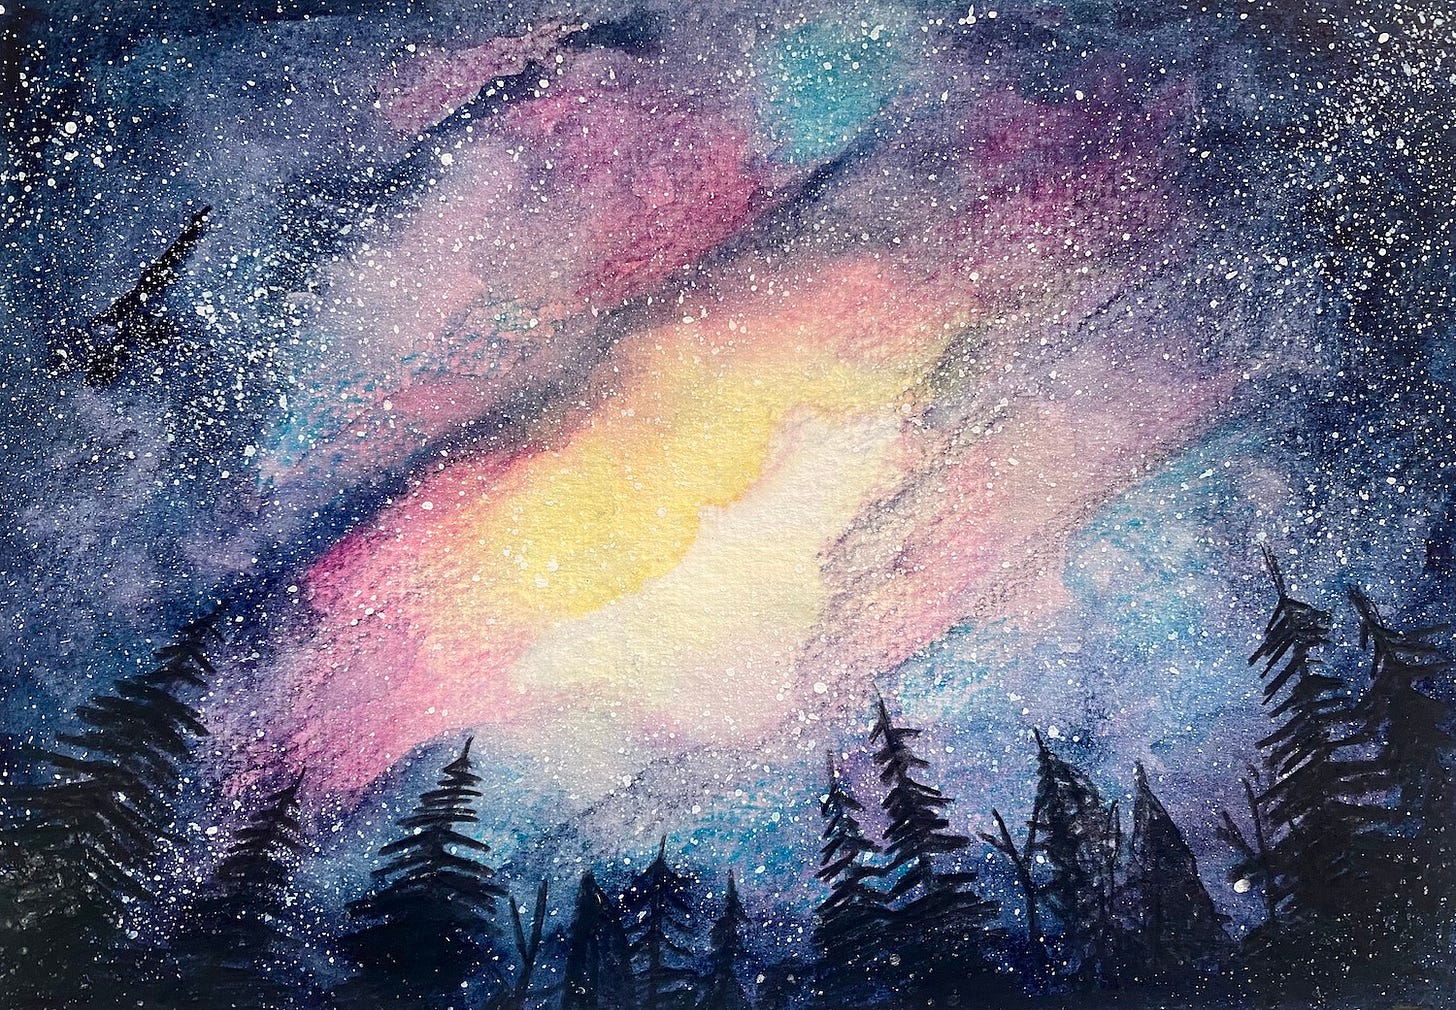 A vibrant watercolour painting of the night sky by Adam Westbrook